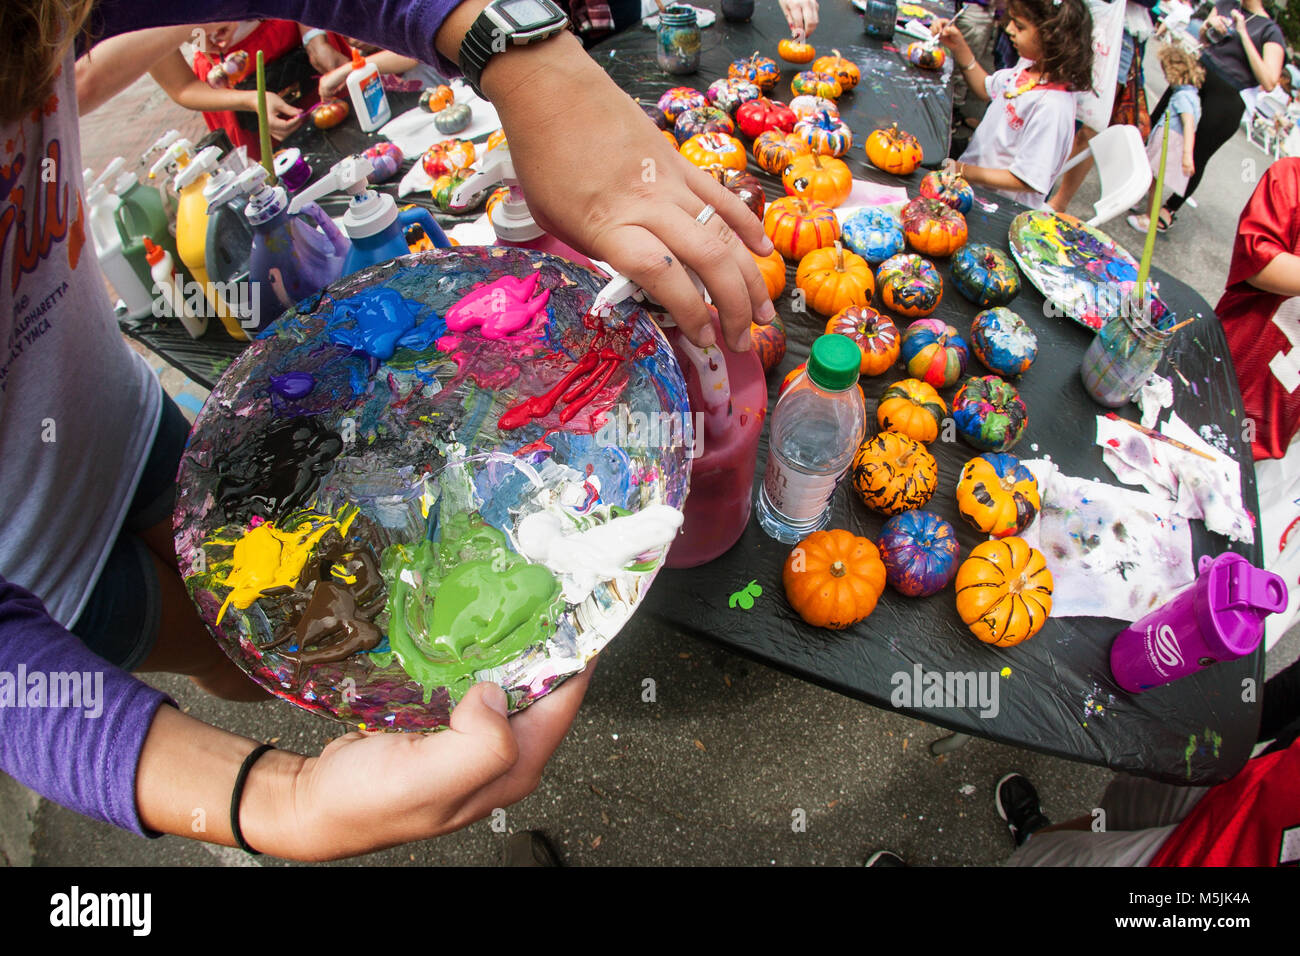 A woman squirts oil paint onto a palette to paint miniature pumpkins at the Scarecrow Harvest fall festival in Alpharetta, GA, on September 30, 2017. Stock Photo